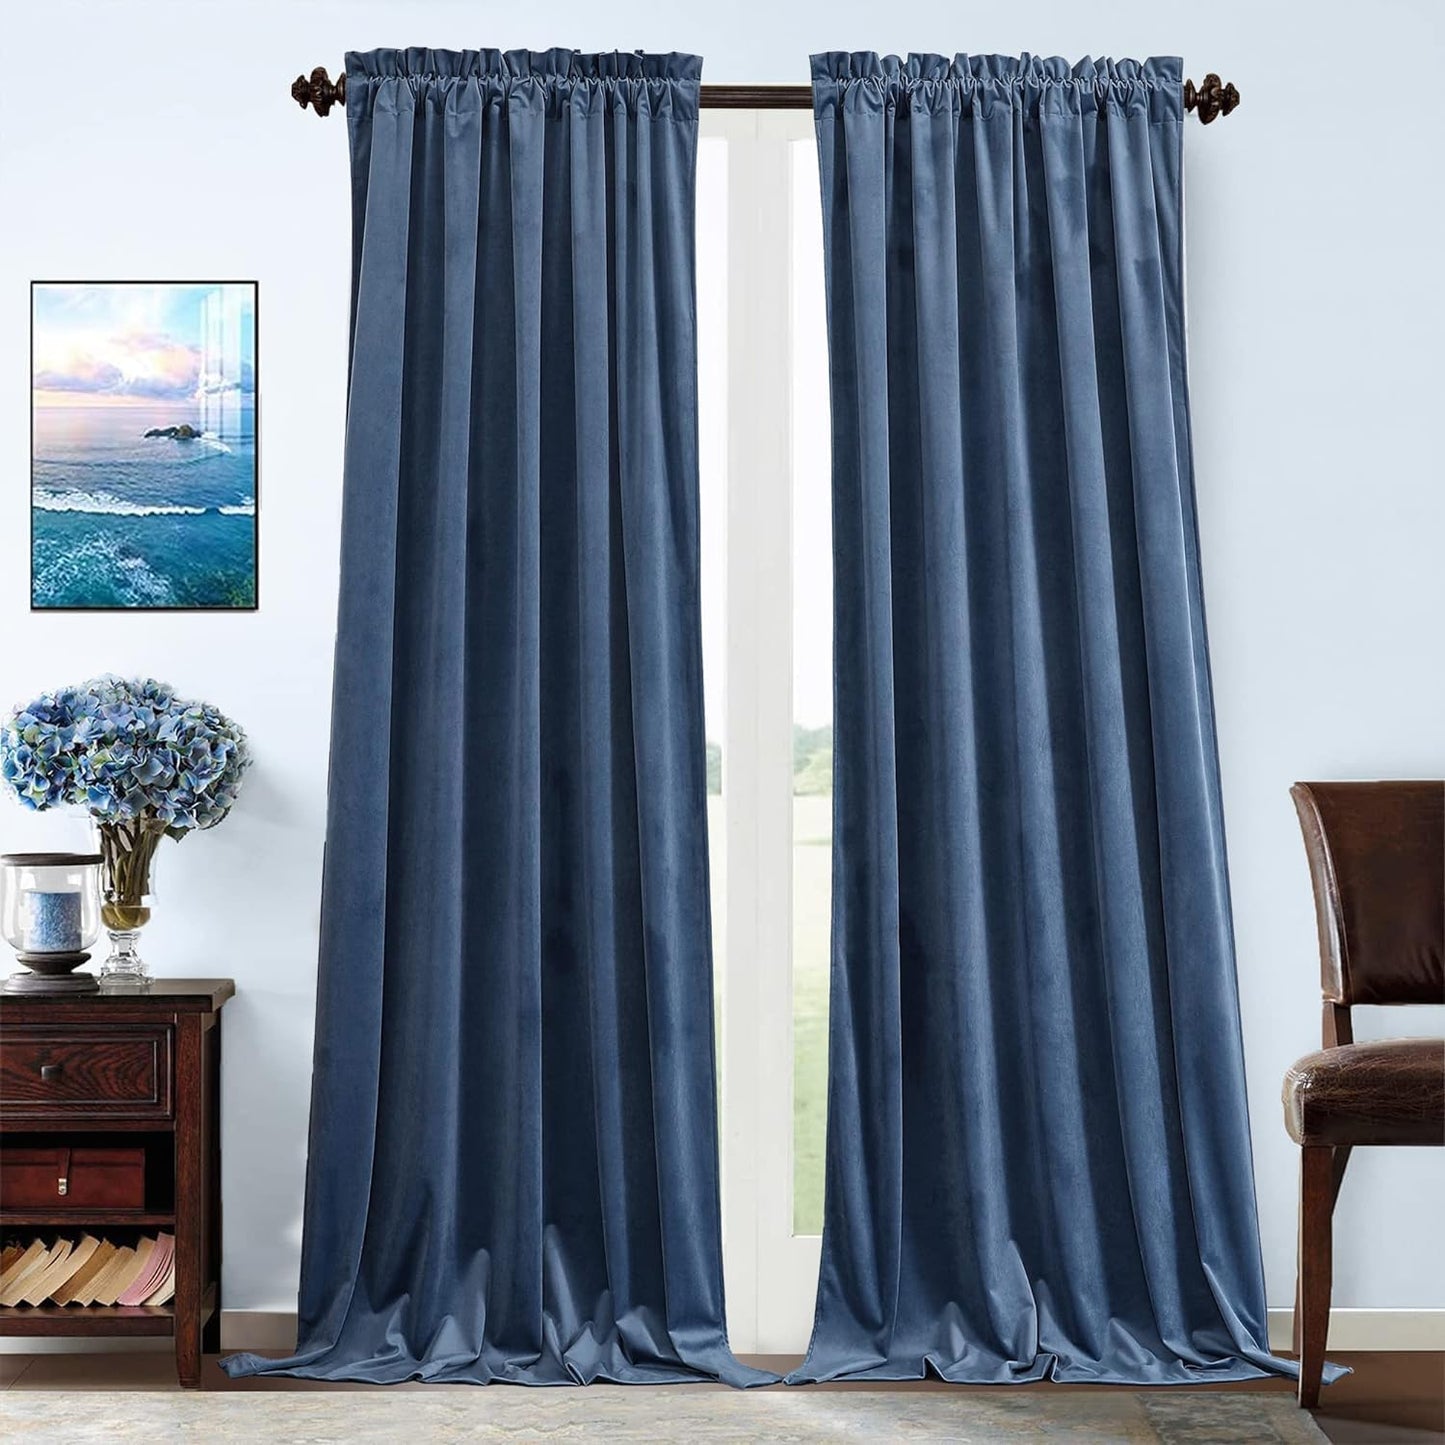 Benedeco Green Velvet Curtains for Bedroom Window, Super Soft Luxury Drapes, Room Darkening Thermal Insulated Rod Pocket Curtain for Living Room, W52 by L84 Inches, 2 Panels  Benedeco Ocean Blue W52 * L120 | 2 Panels 